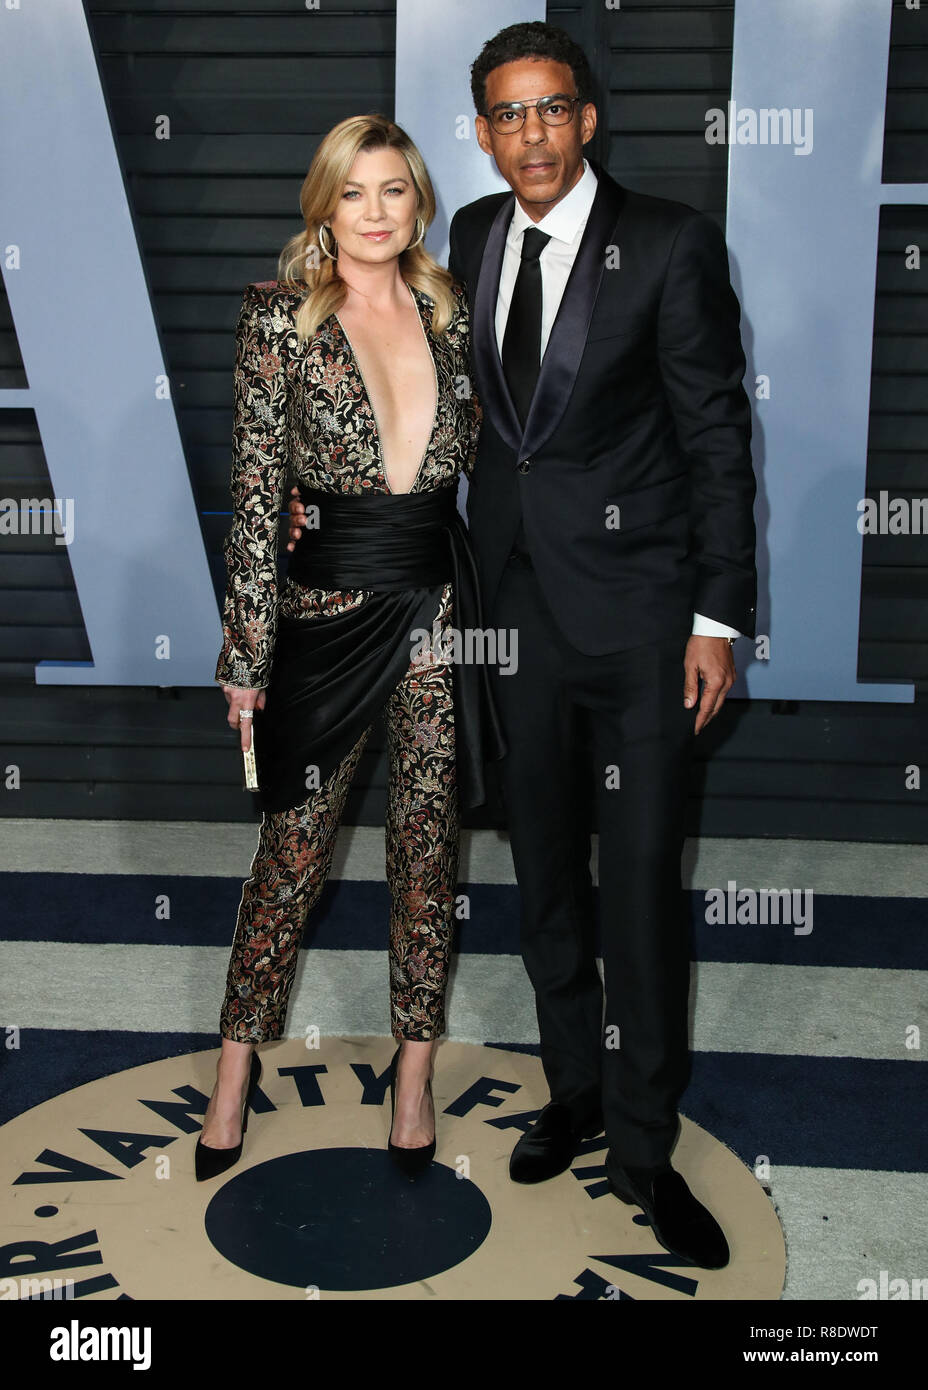 BEVERLY HILLS, LOS ANGELES, CA, USA - MARCH 04: Ellen Pompeo, Chris Ivery  at the 2018 Vanity Fair Oscar Party held at the Wallis Annenberg Center for  the Performing Arts on March